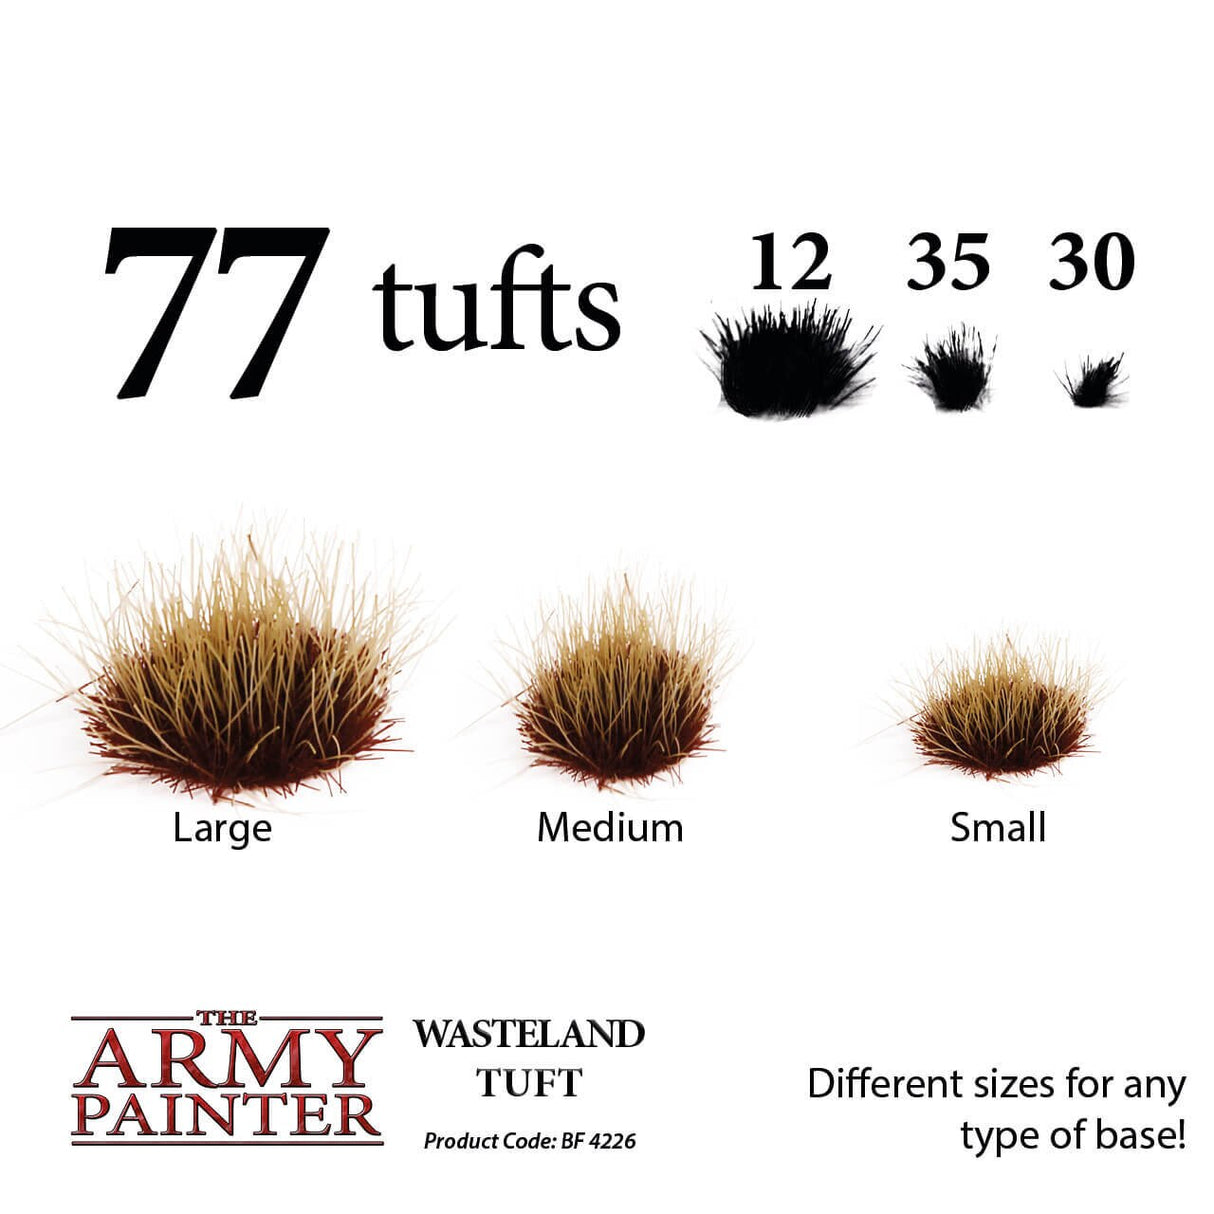 Army Painter BF4226 Wasteland Tuft The Army Painter TRAINS - SCENERY